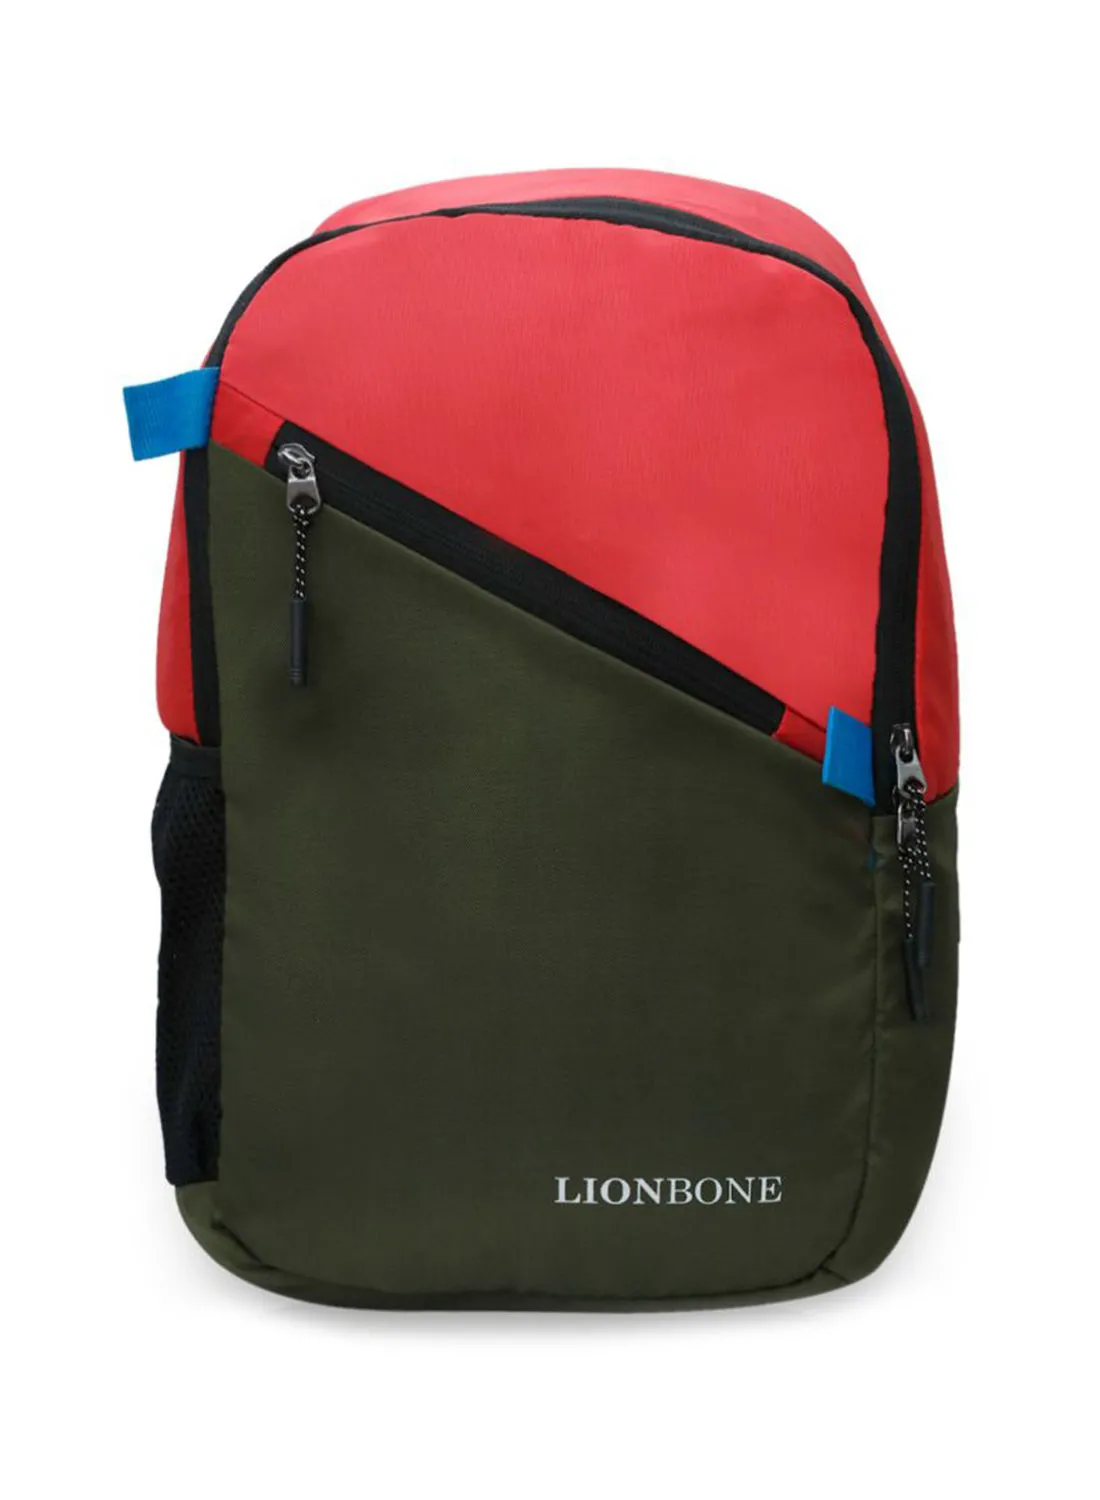 LIONBONE 22L Water Resistant Unisex Polyester Laptop Backpack with Zip closure compatible with 13' Laptop Red/Green